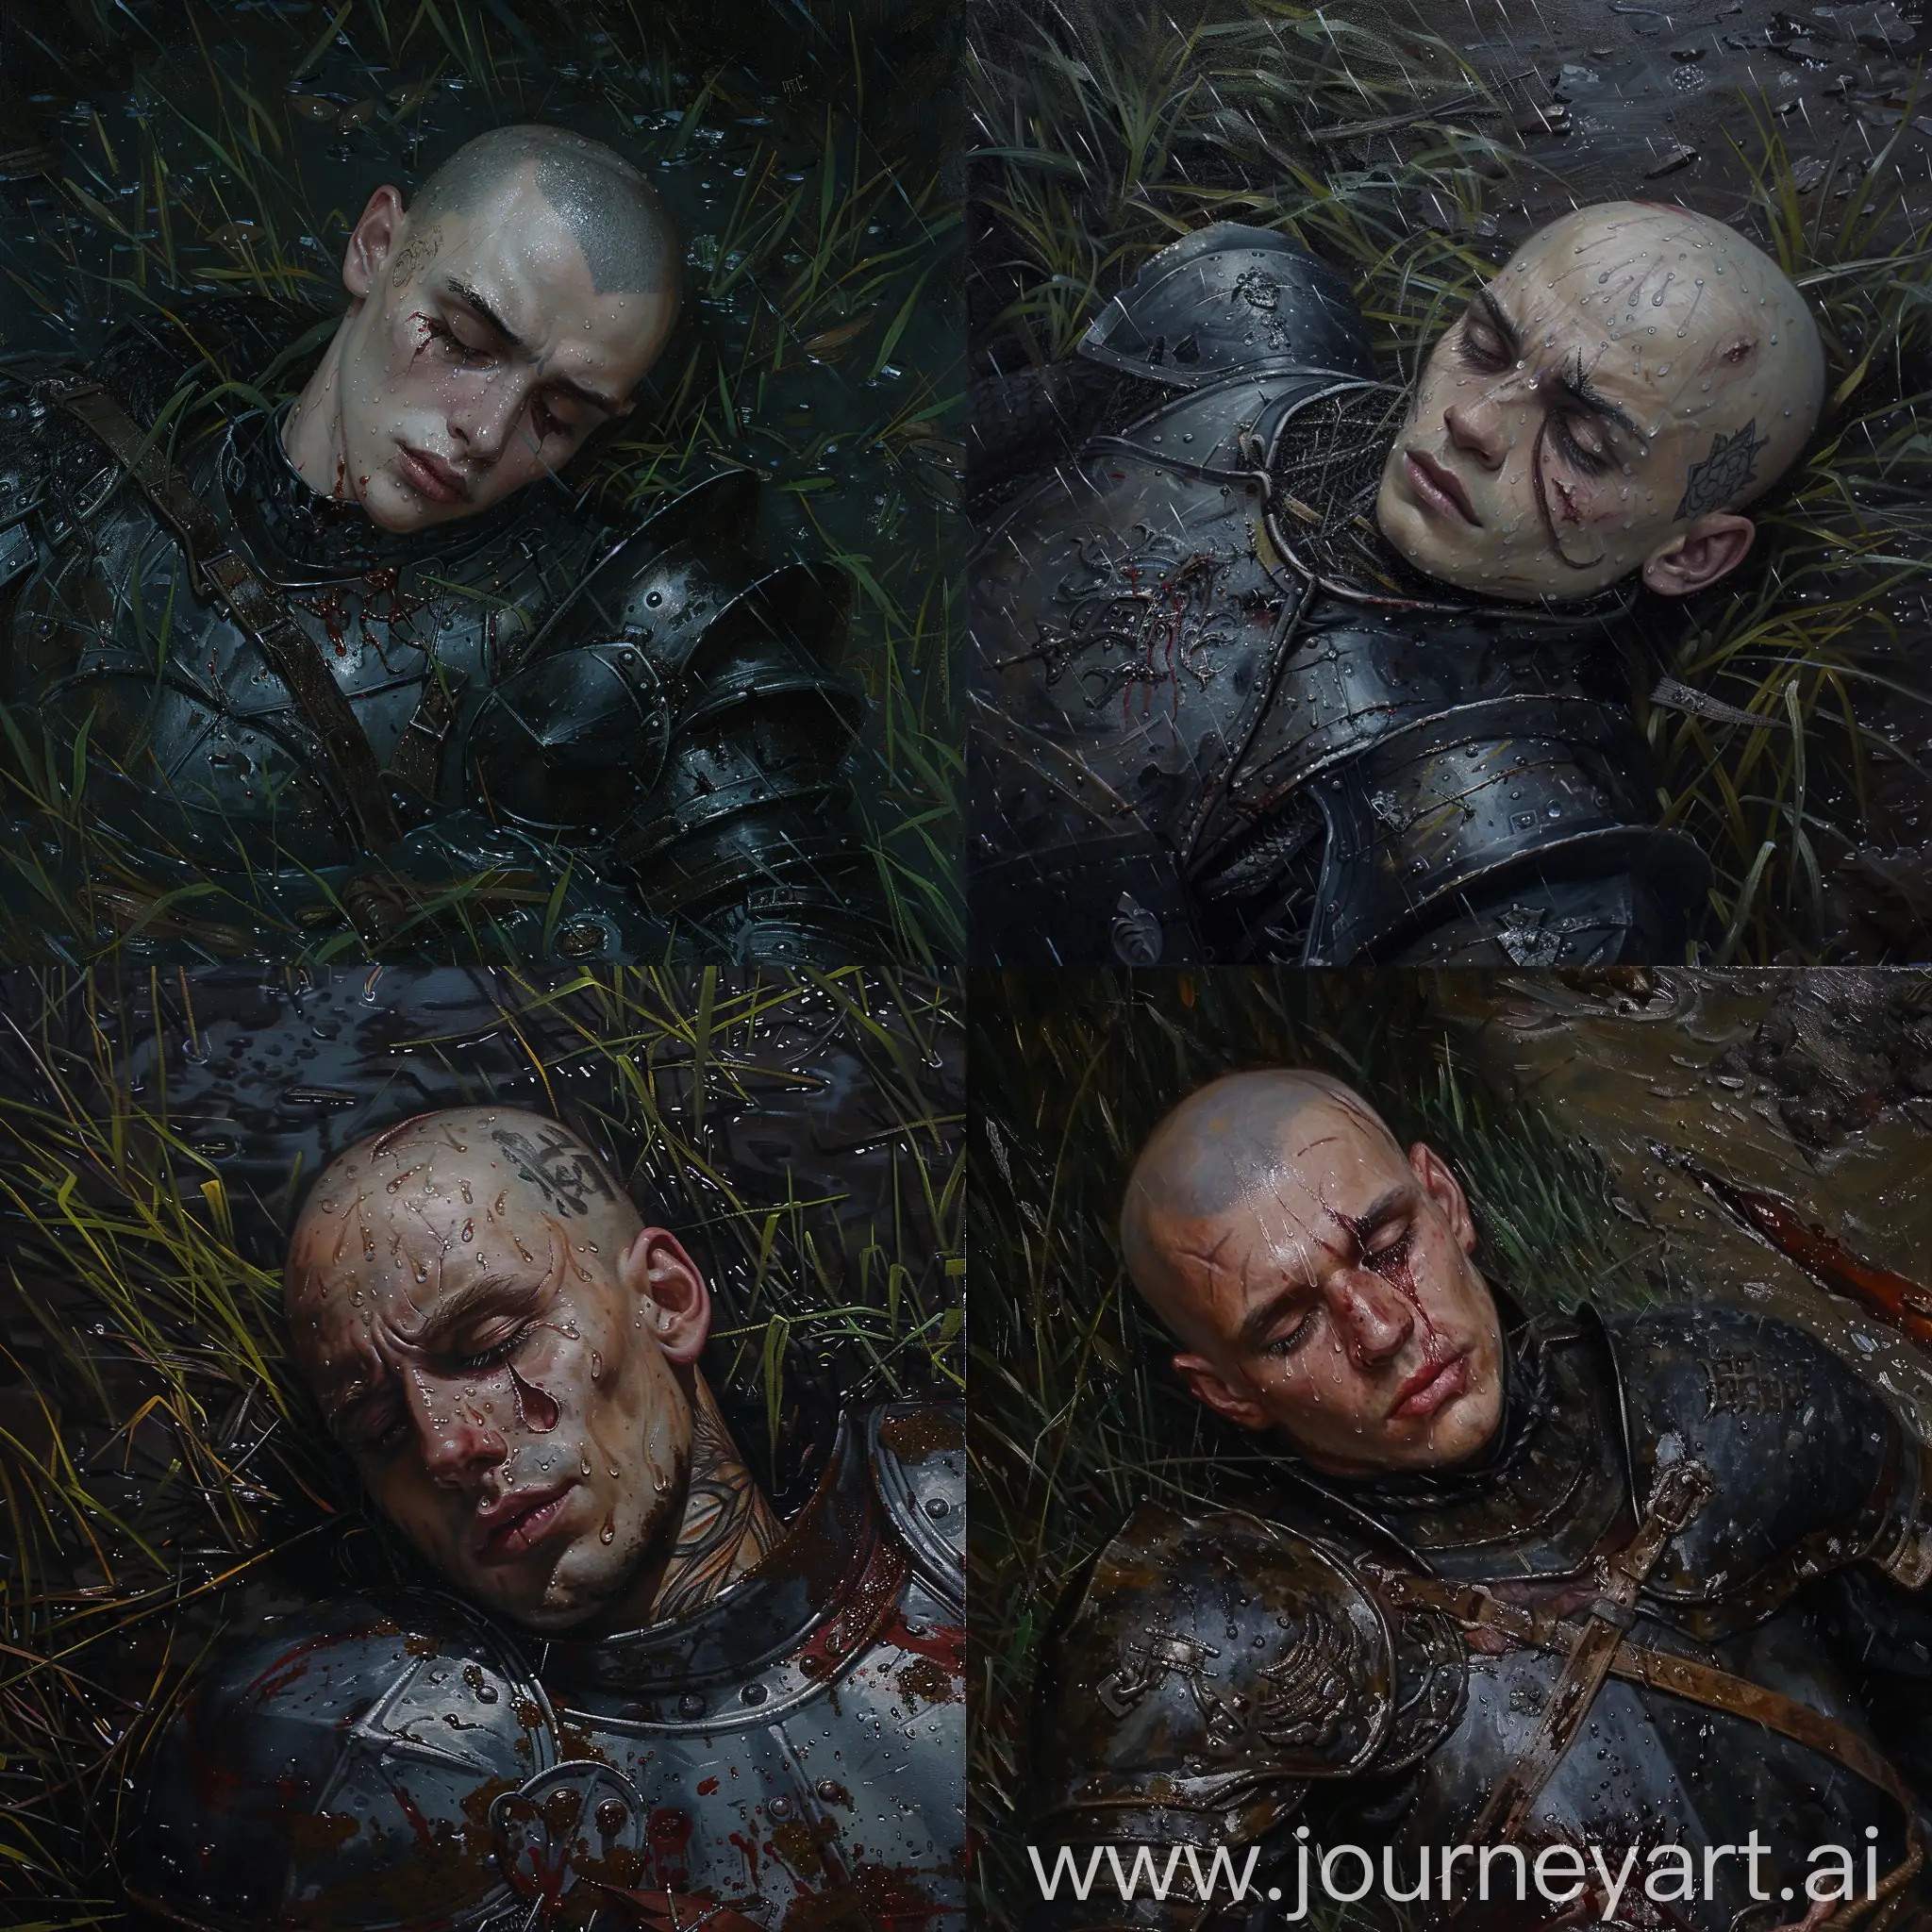 Russian man, 20 years old, bald, tattoo of a tear under the eye, in armor, in the rain, lying dead on the wet ground, in the grass, view from top, Leonardo da Vinci style, oil painting, high quality, detailed, darkness.